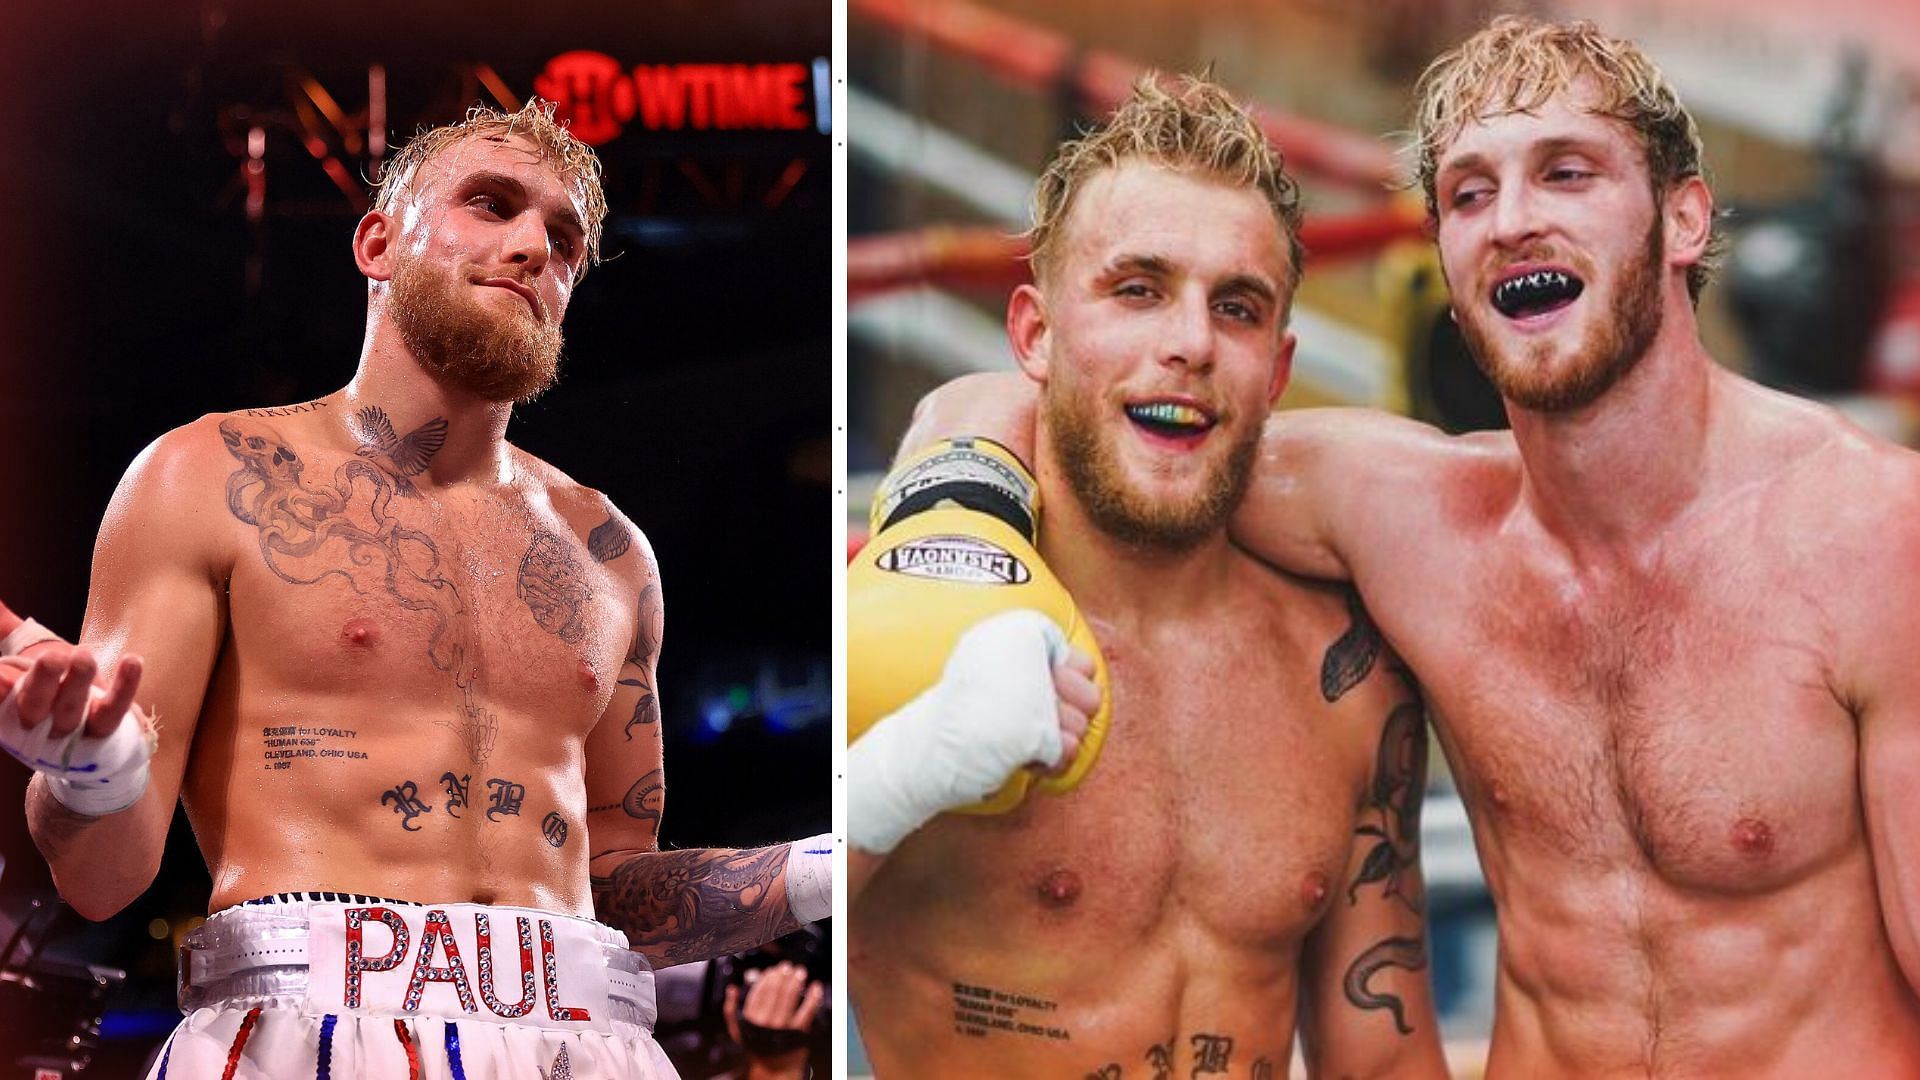 YouTuber Logan Paul may be sidelined, but might form an alliance with brother Jake Paul when he returns to WWE.